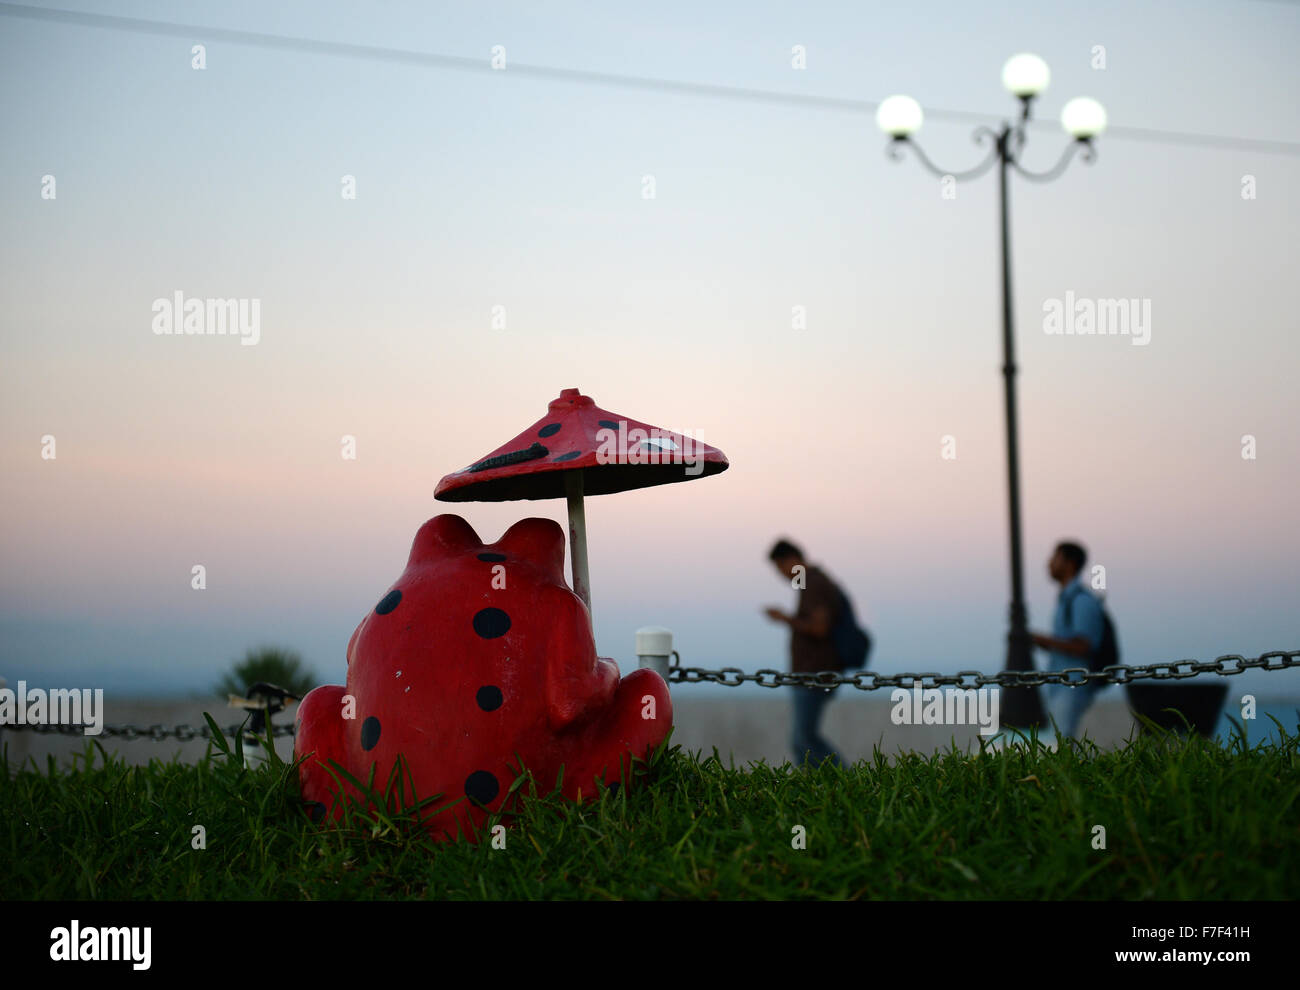 Managua, Nicaragua. 27th Nov, 2015. Strollers walk past a sculpture depicting a red frog with umbrella standing on the promenade of El Malecon at the Port Salvador Allende in Managua, Nicaragua, 27 November 2015. Photo: Jens Kalaene/dpa/Alamy Live News Stock Photo